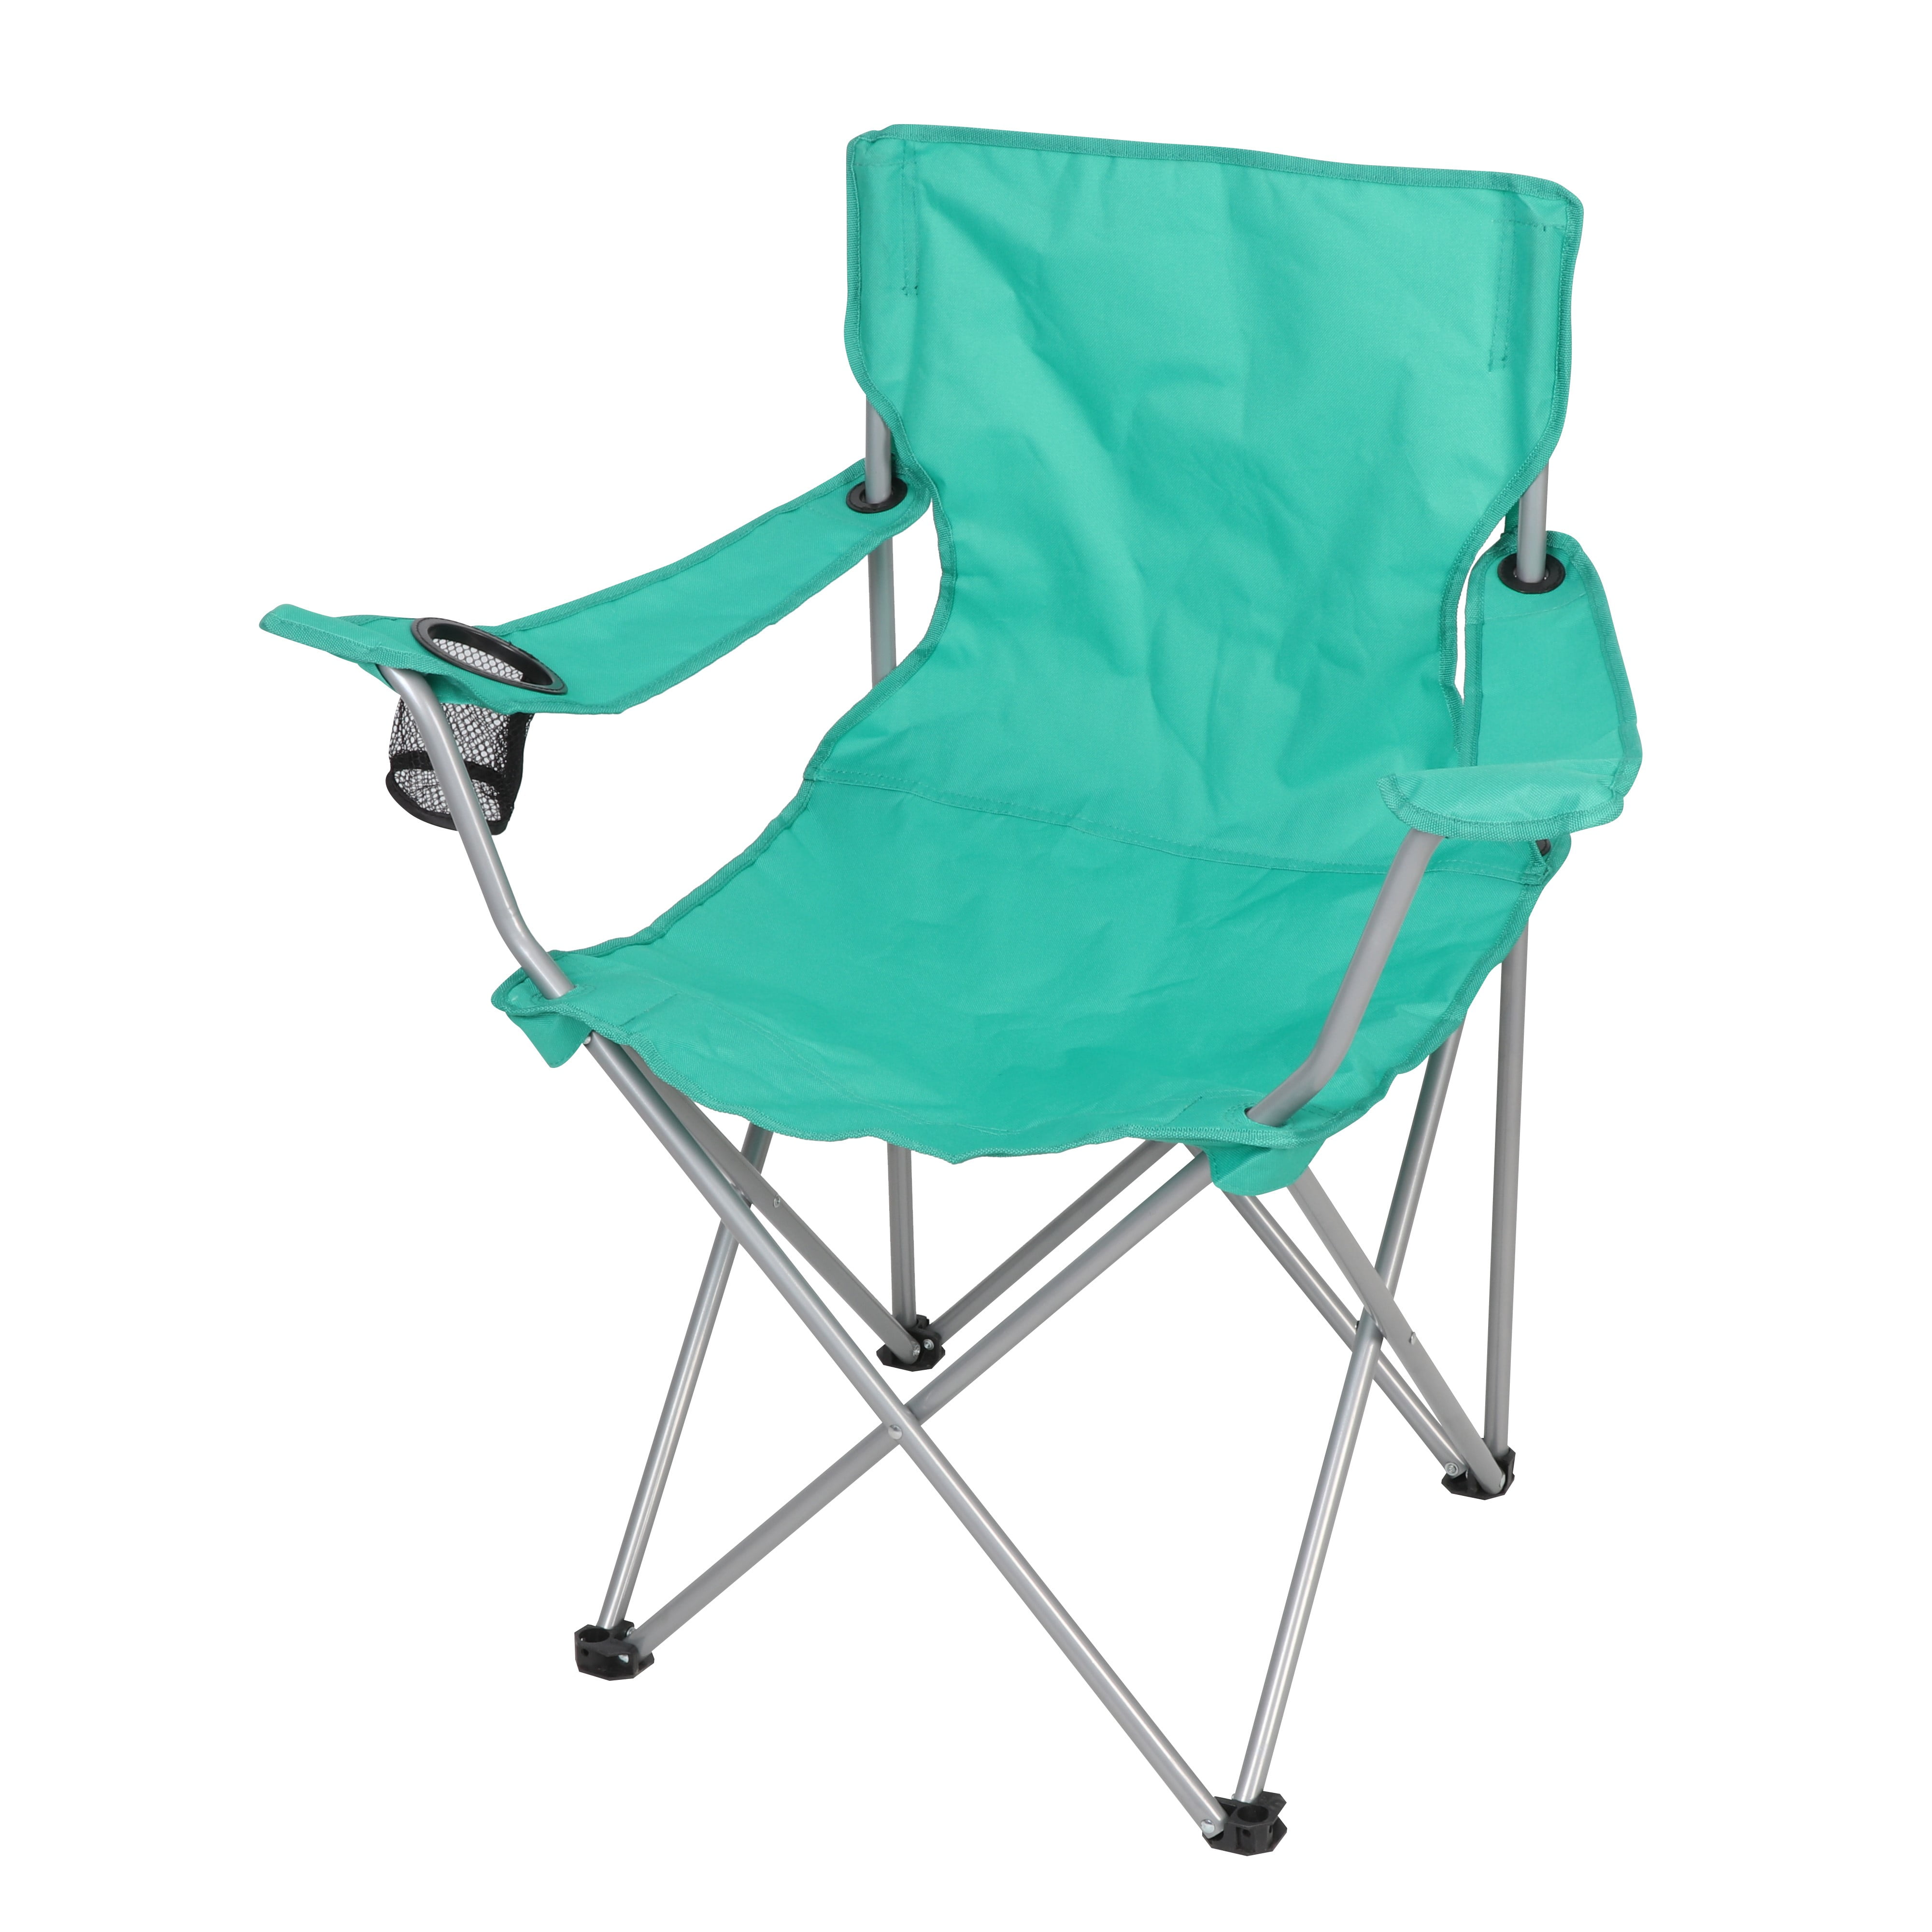 Trail Folding Chair Red/Blue/Green 